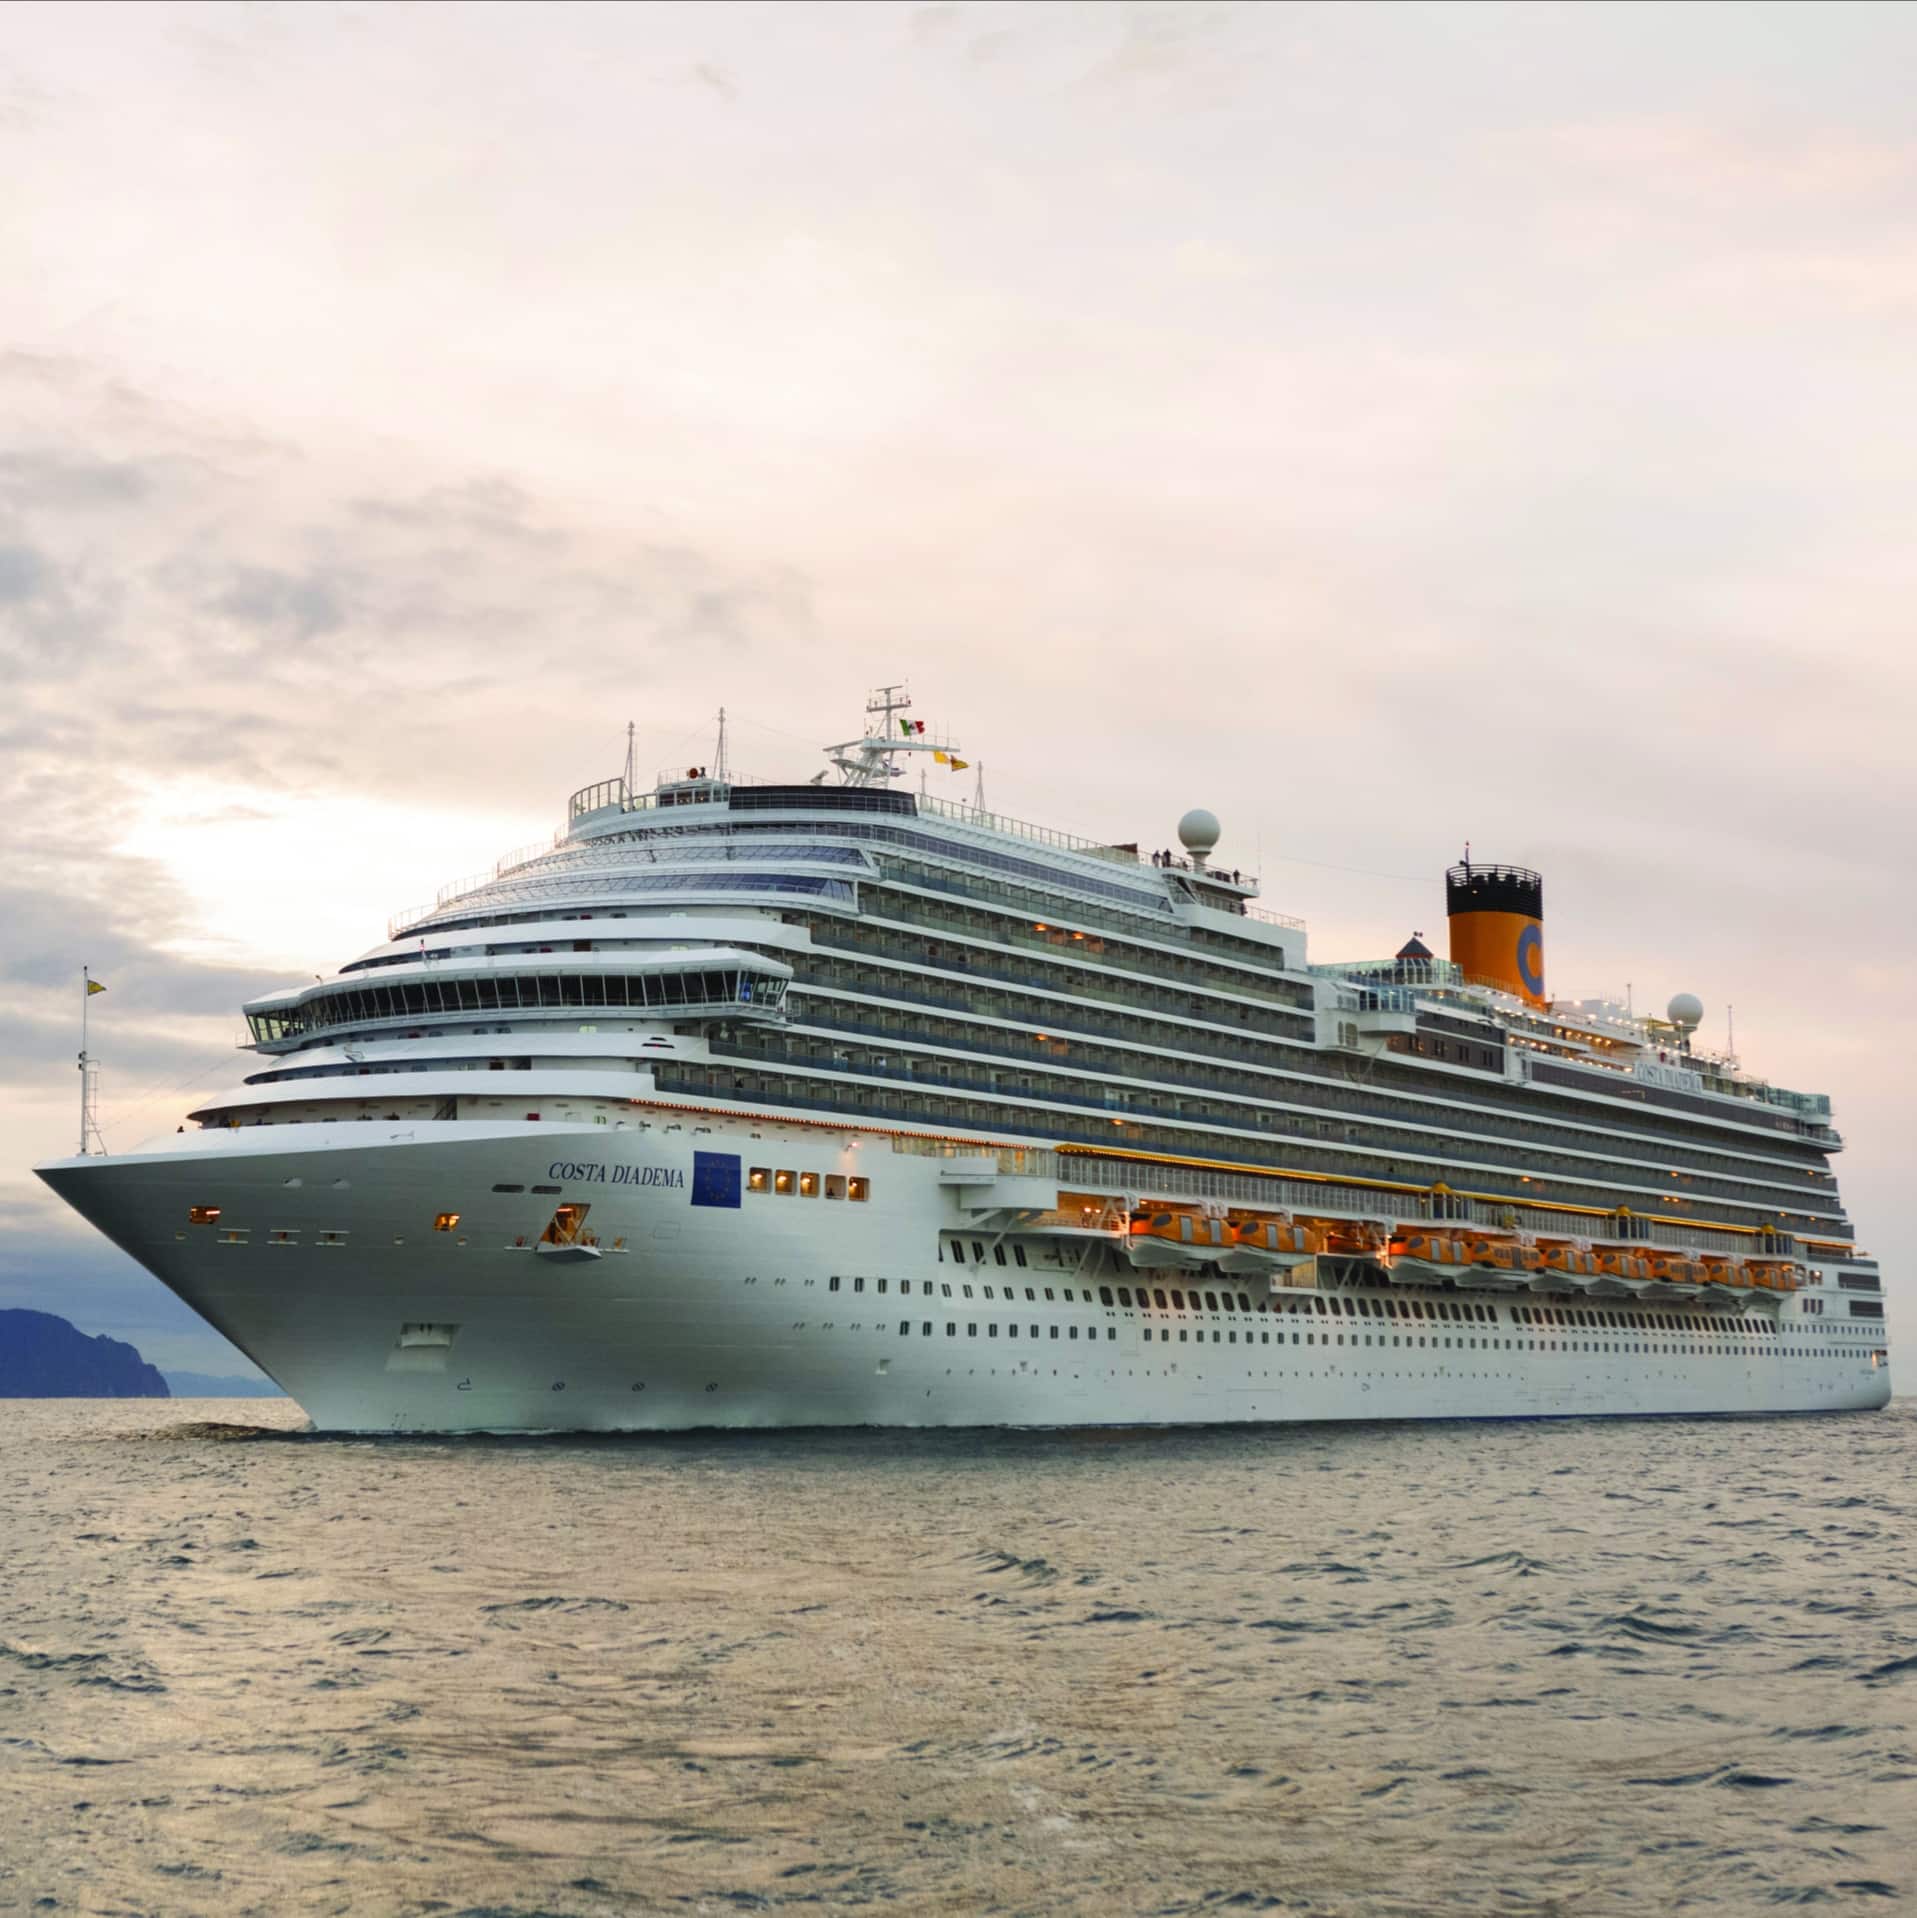 ï»¿Costa Cruises announces temporary pause of its operations â CRUISE TO ...